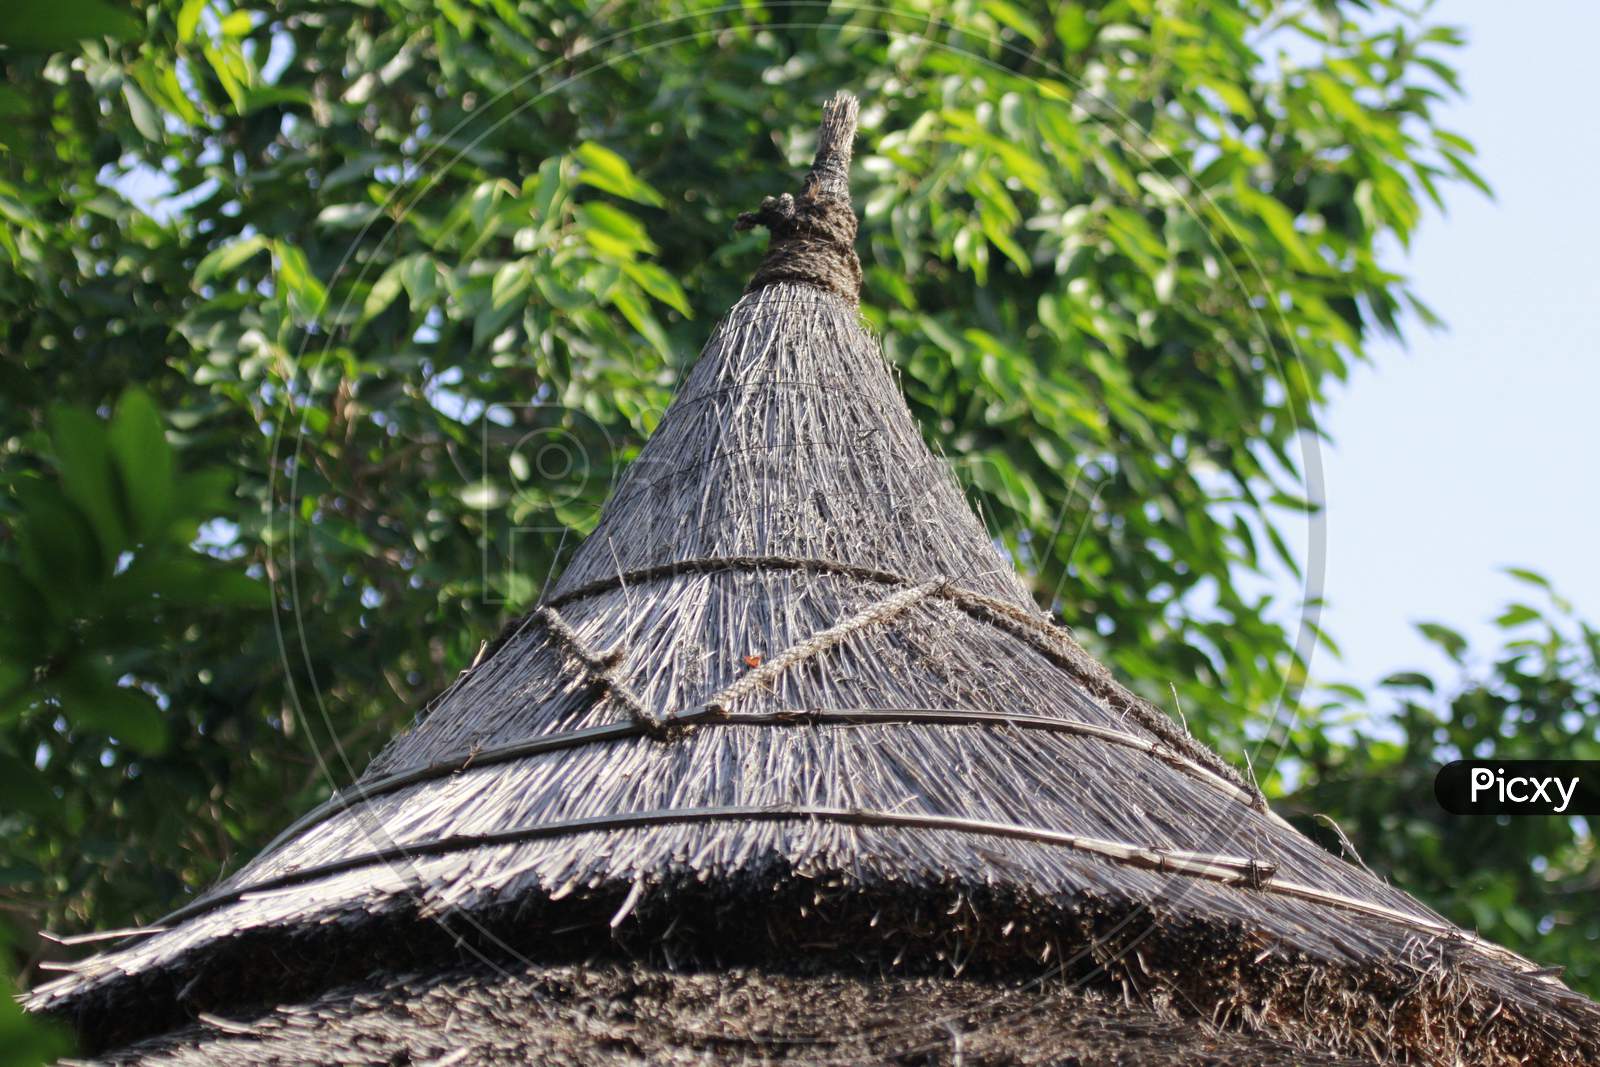 Top Roof of the Thatched House